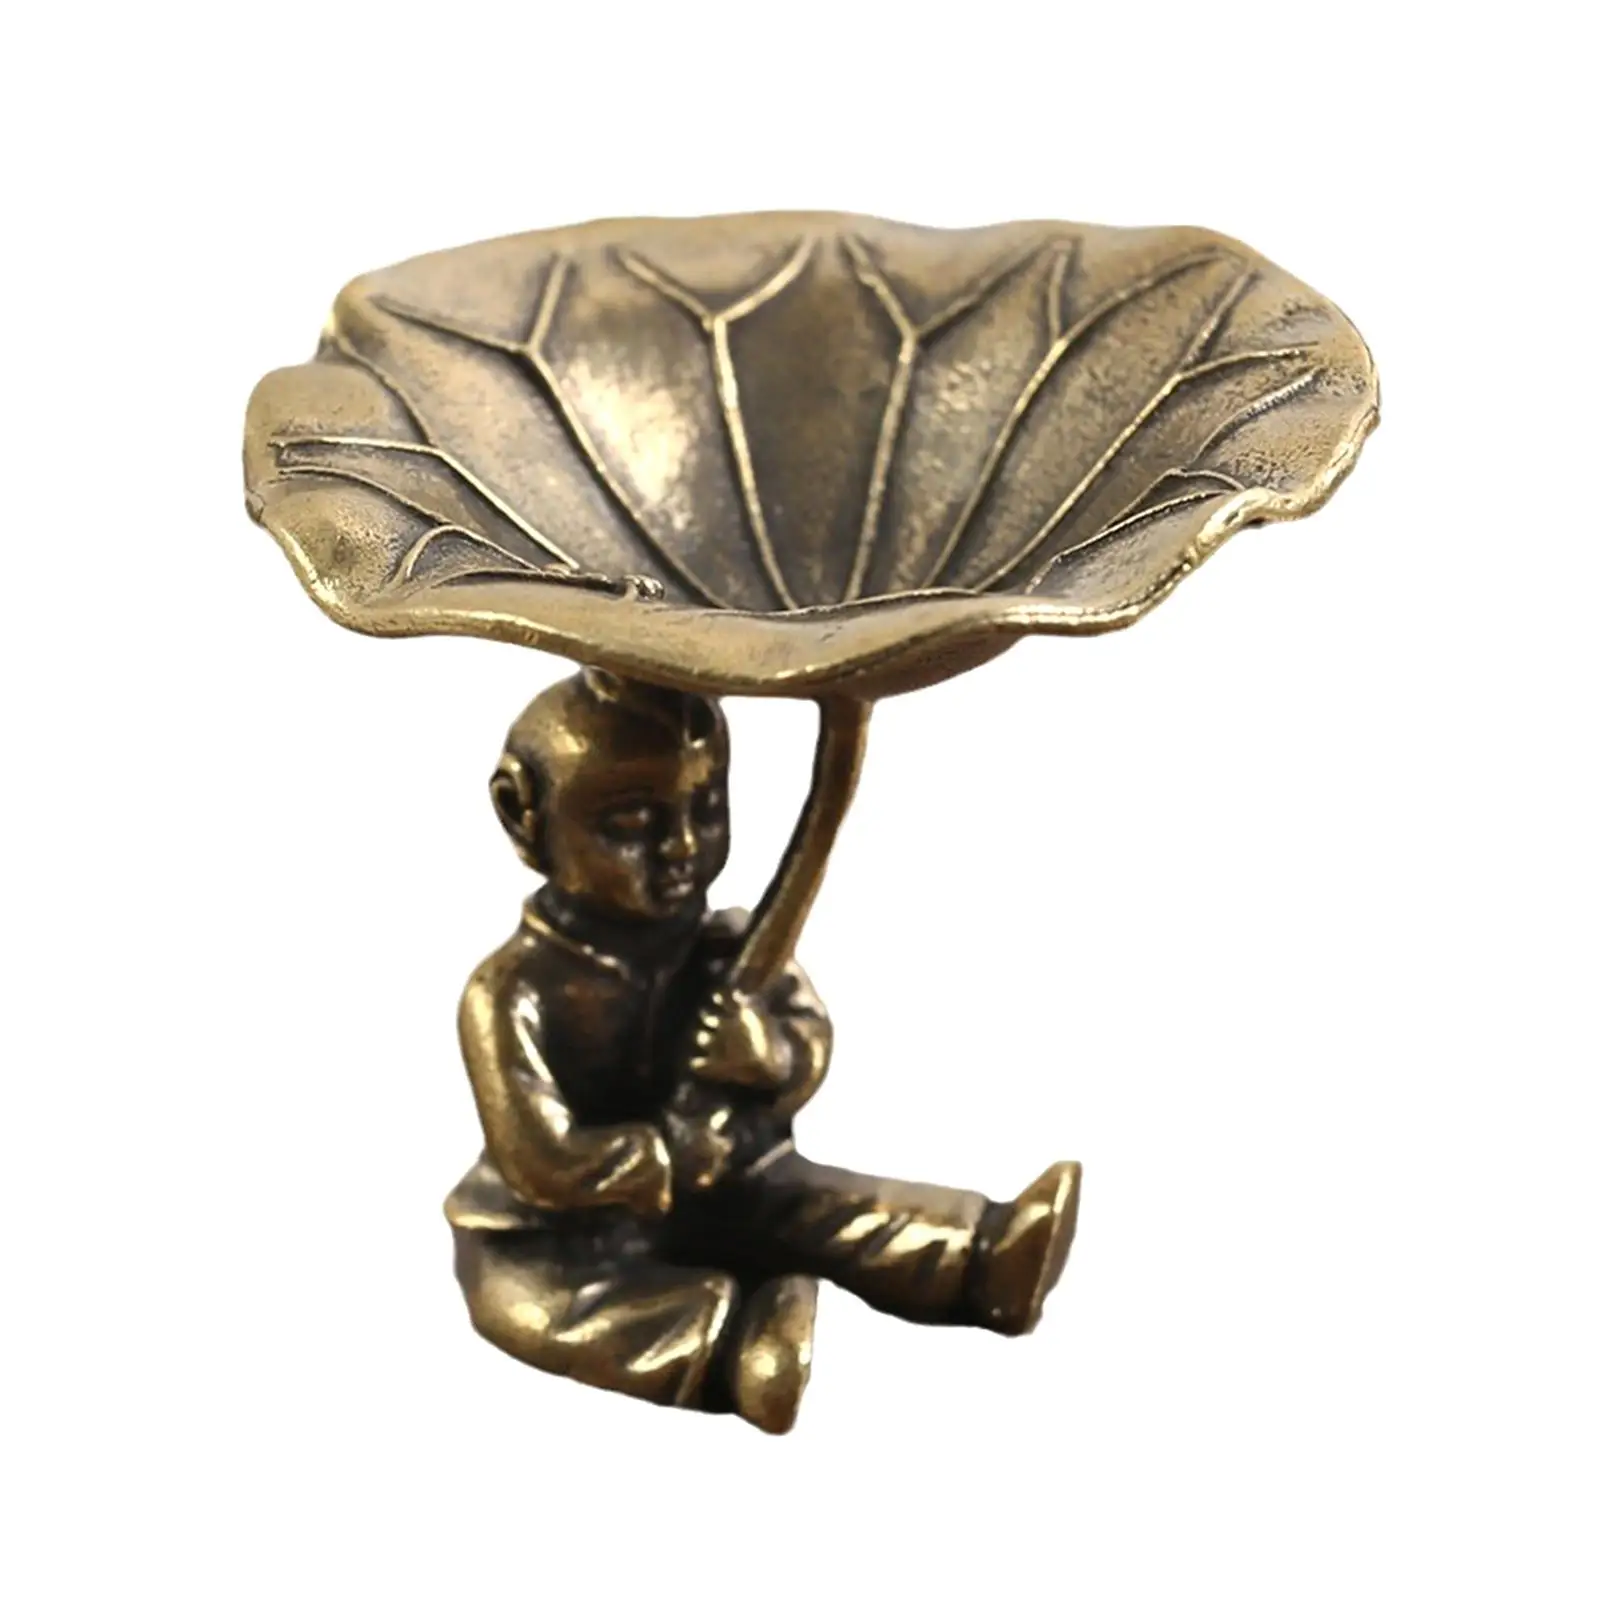 Brass Incense Holder Brass Decor Portable Table Figurine Ornament Incense Stoves for Yoga Bedroom Living Room Indoor Relaxation